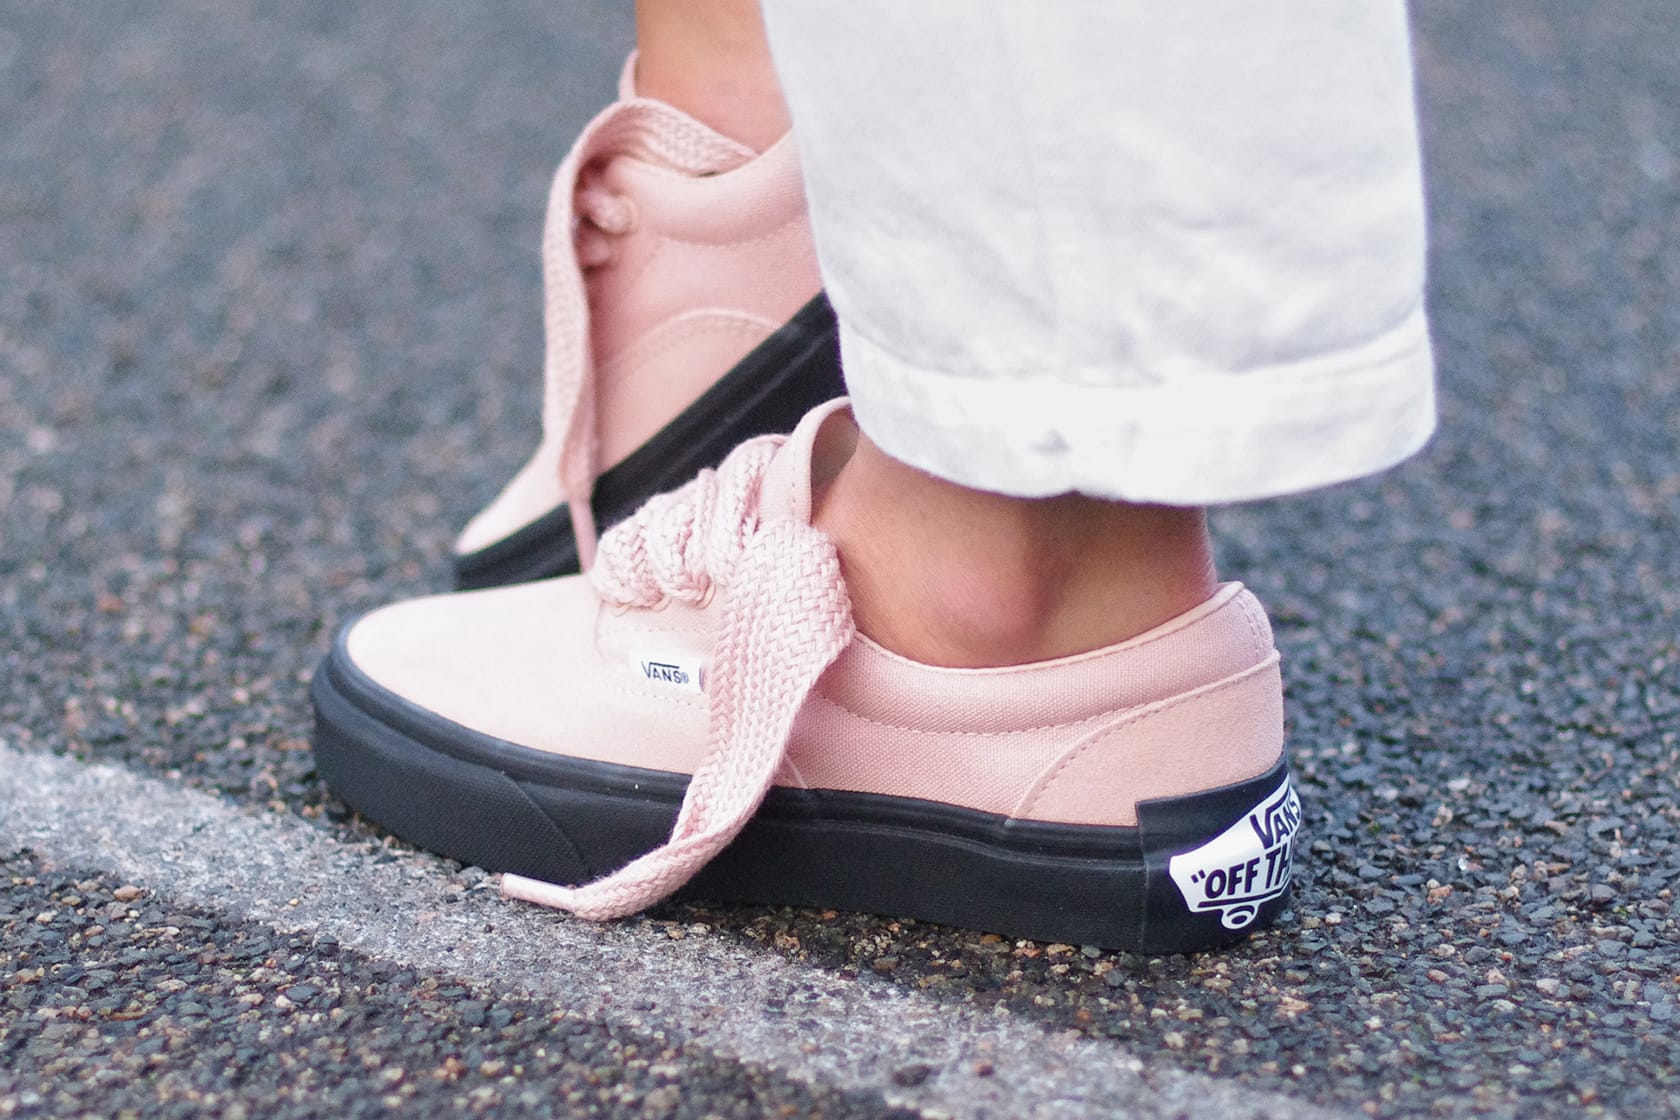 purlicue x vans year of the pig